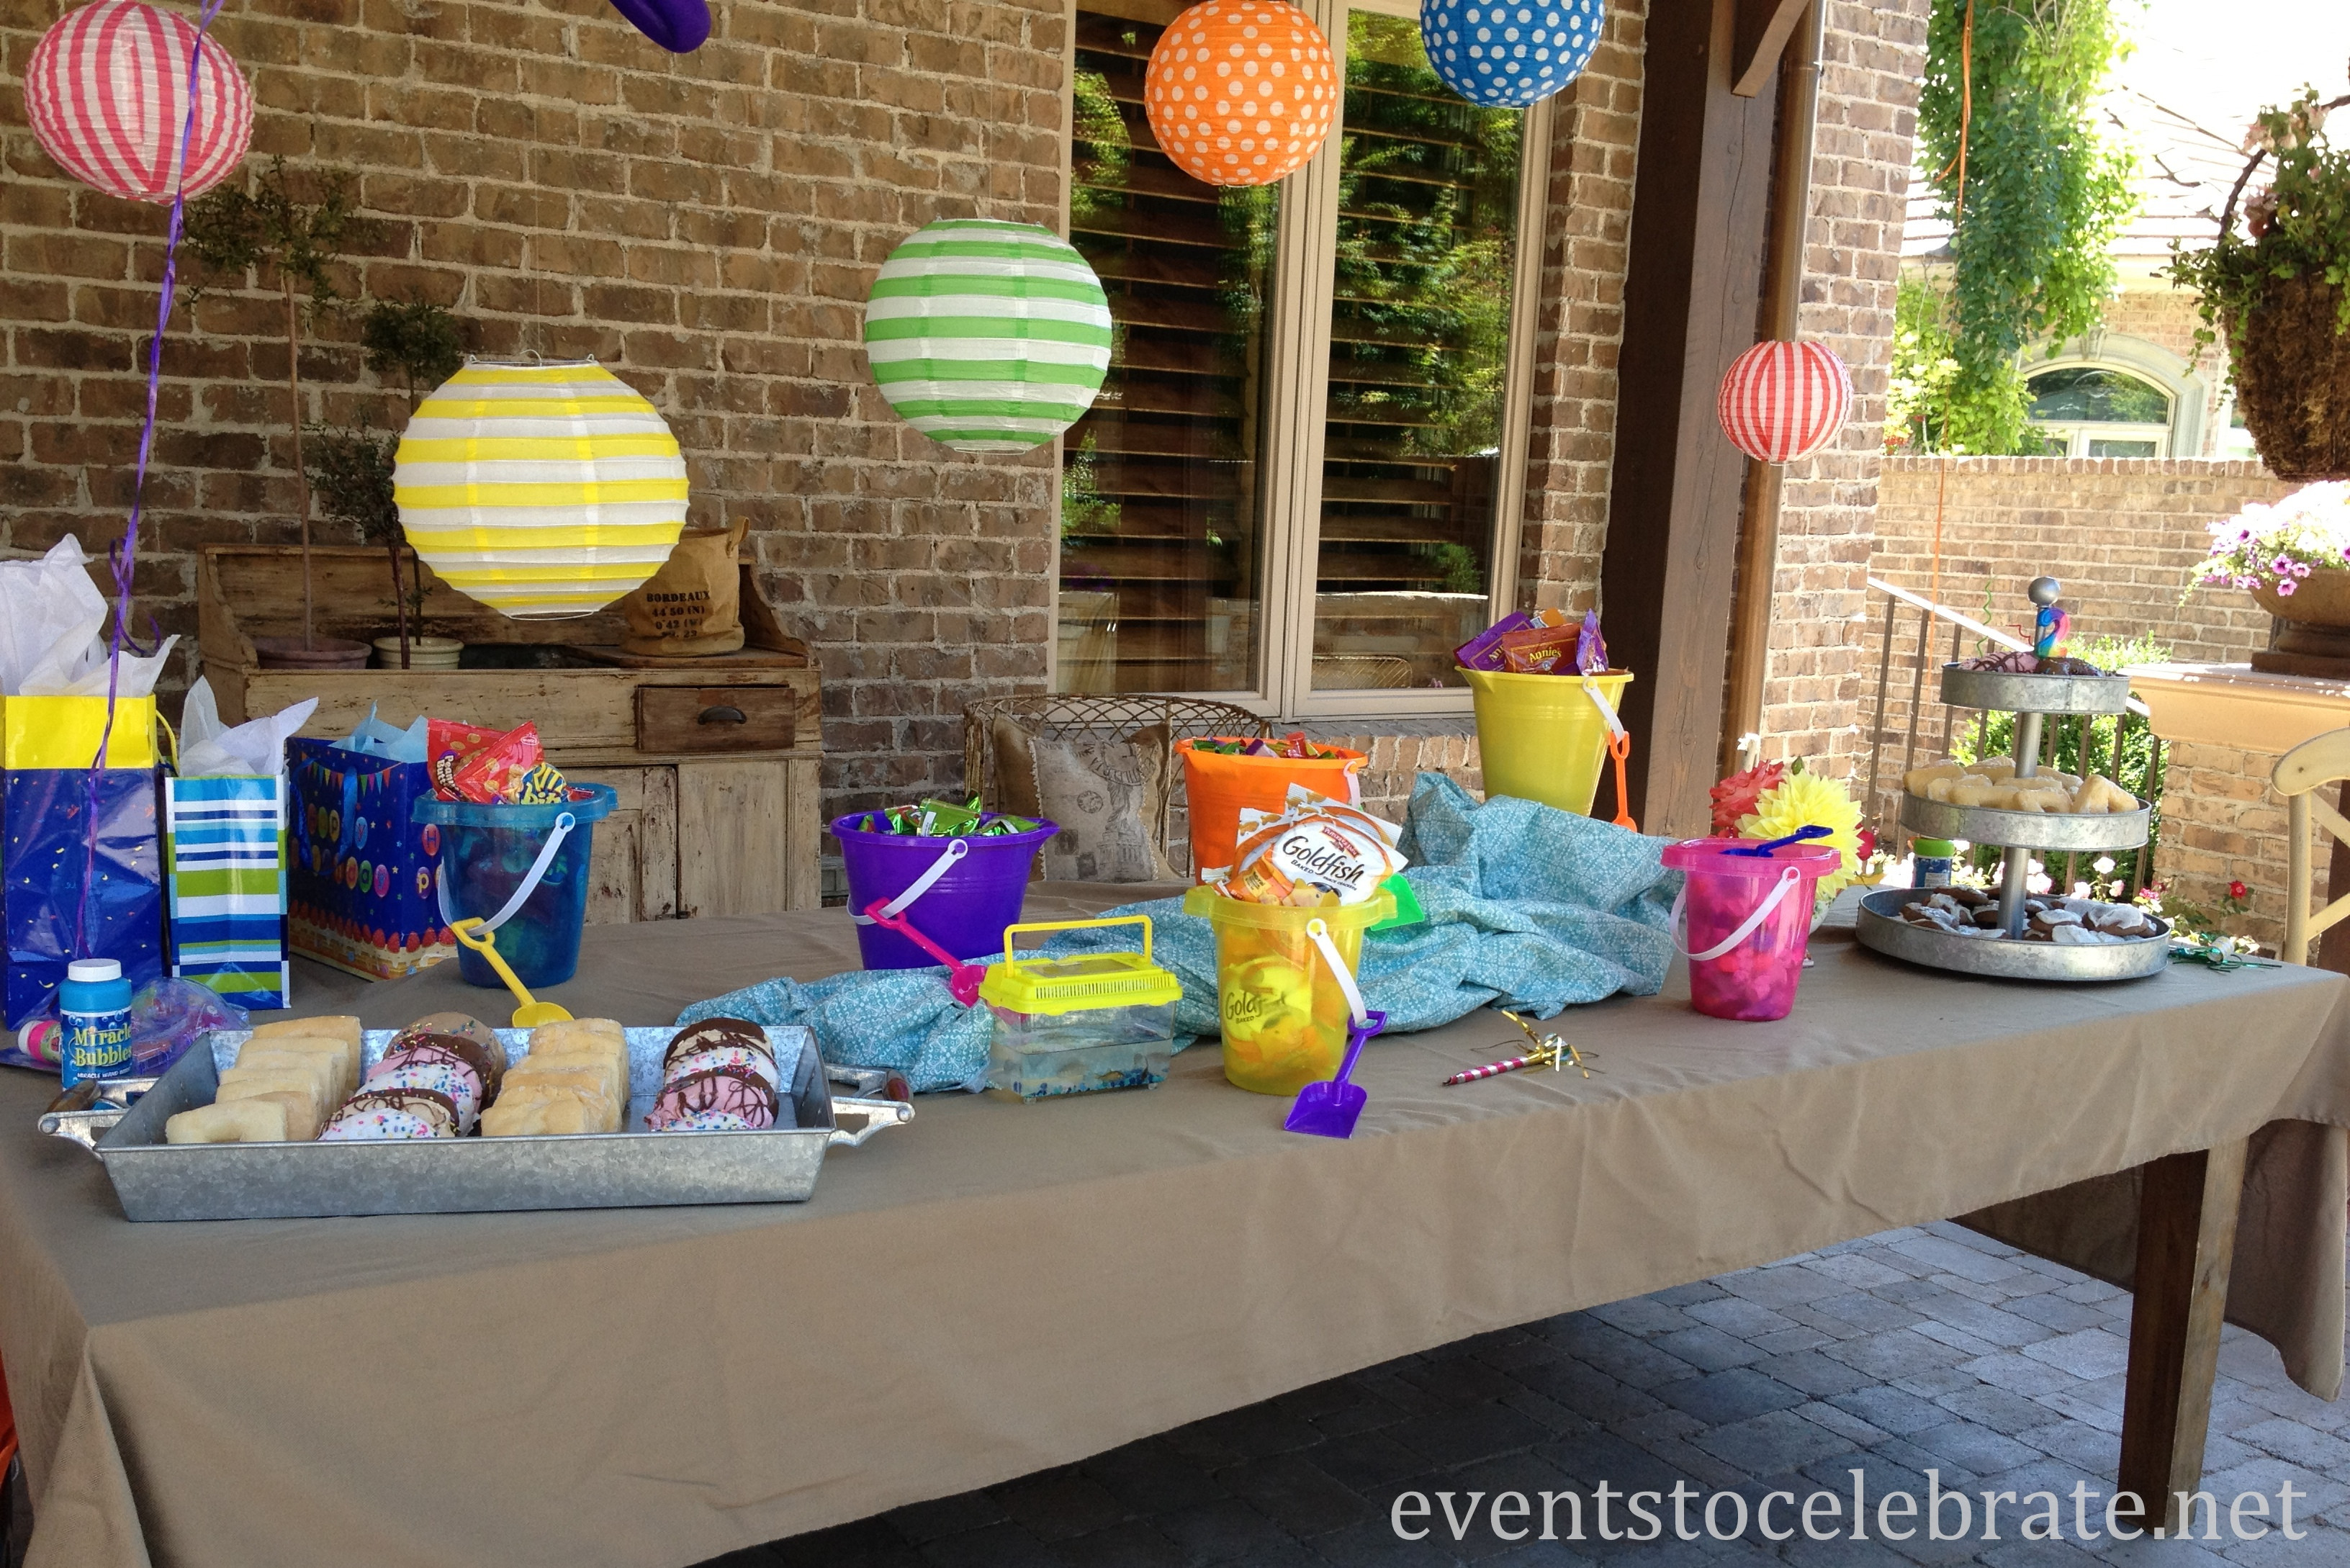 Swimming Pool Party Ideas
 Pool Party Ideas events to CELEBRATE